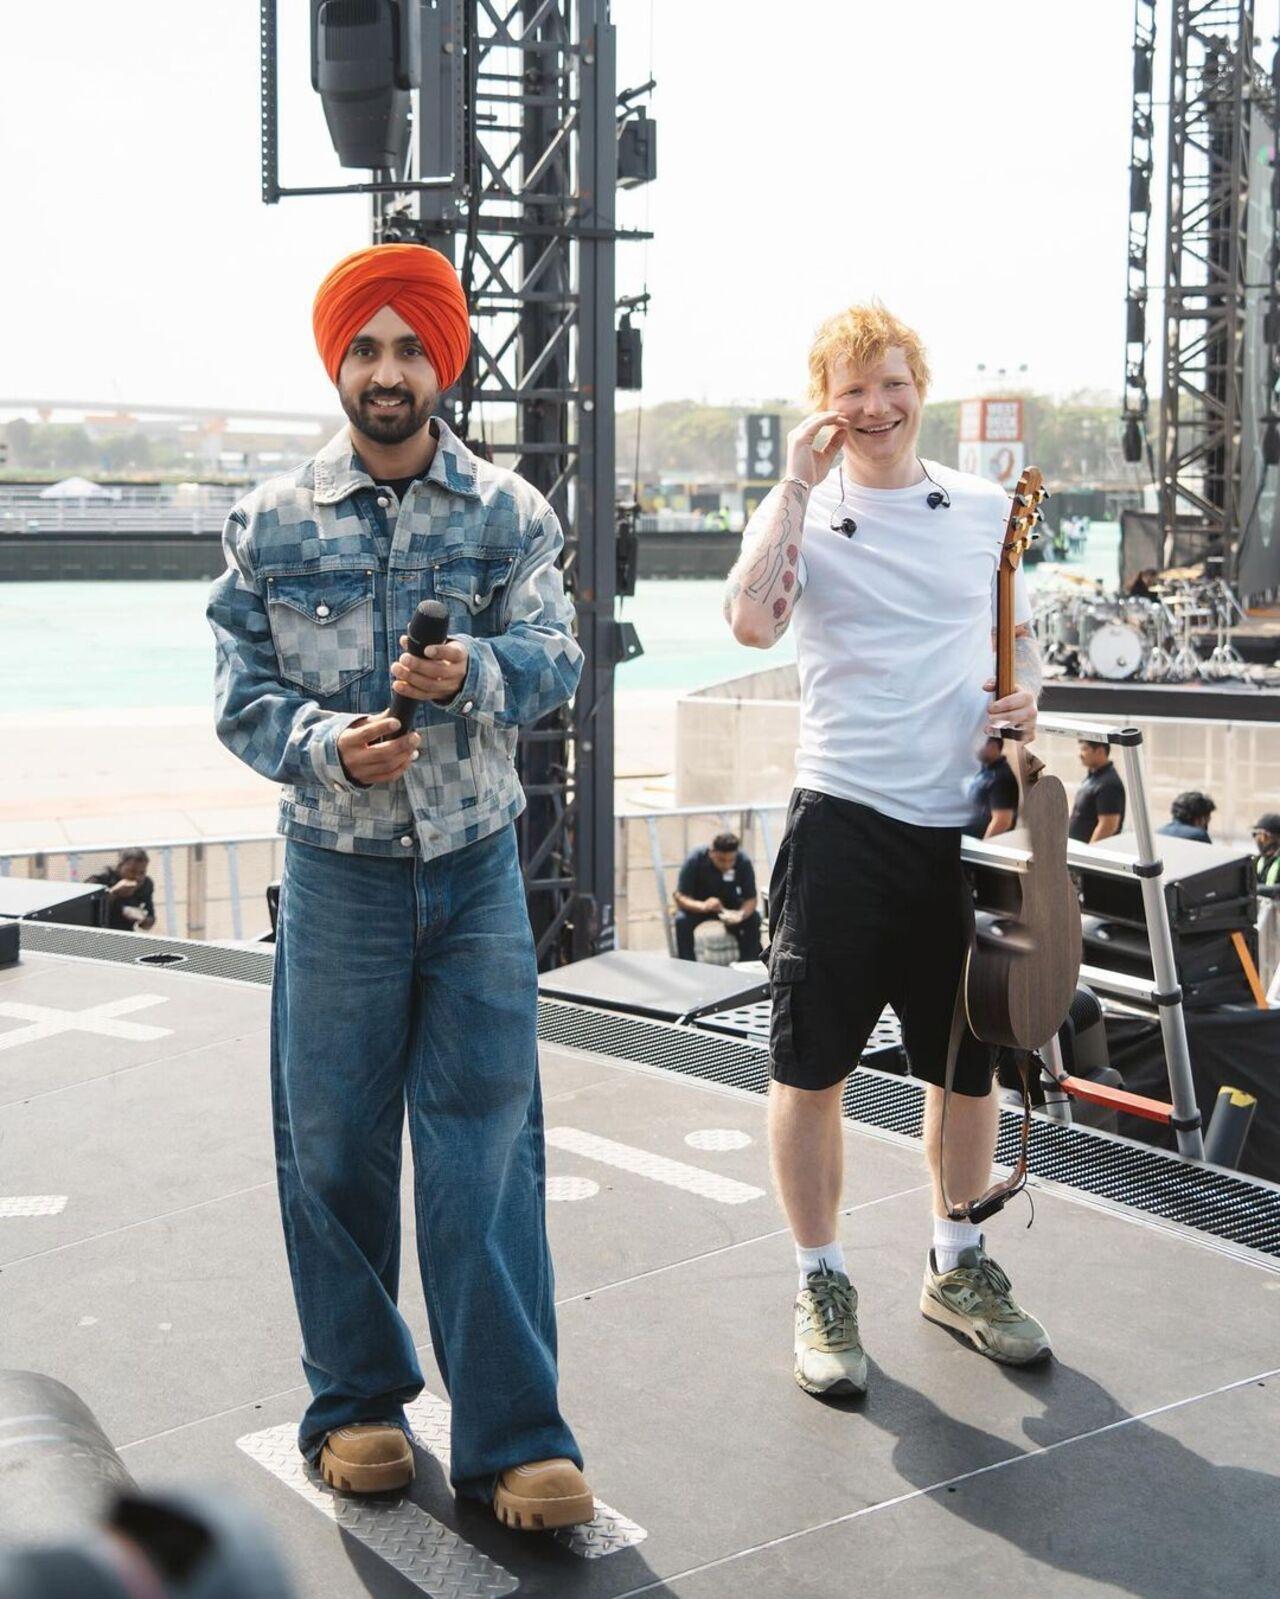 Diljit opted for an all-denim look for the rehearsals at the Mahalaxmi racecourse before the big night. Ed was seen in his trademark white t-shirt and shorts for the rehearsals